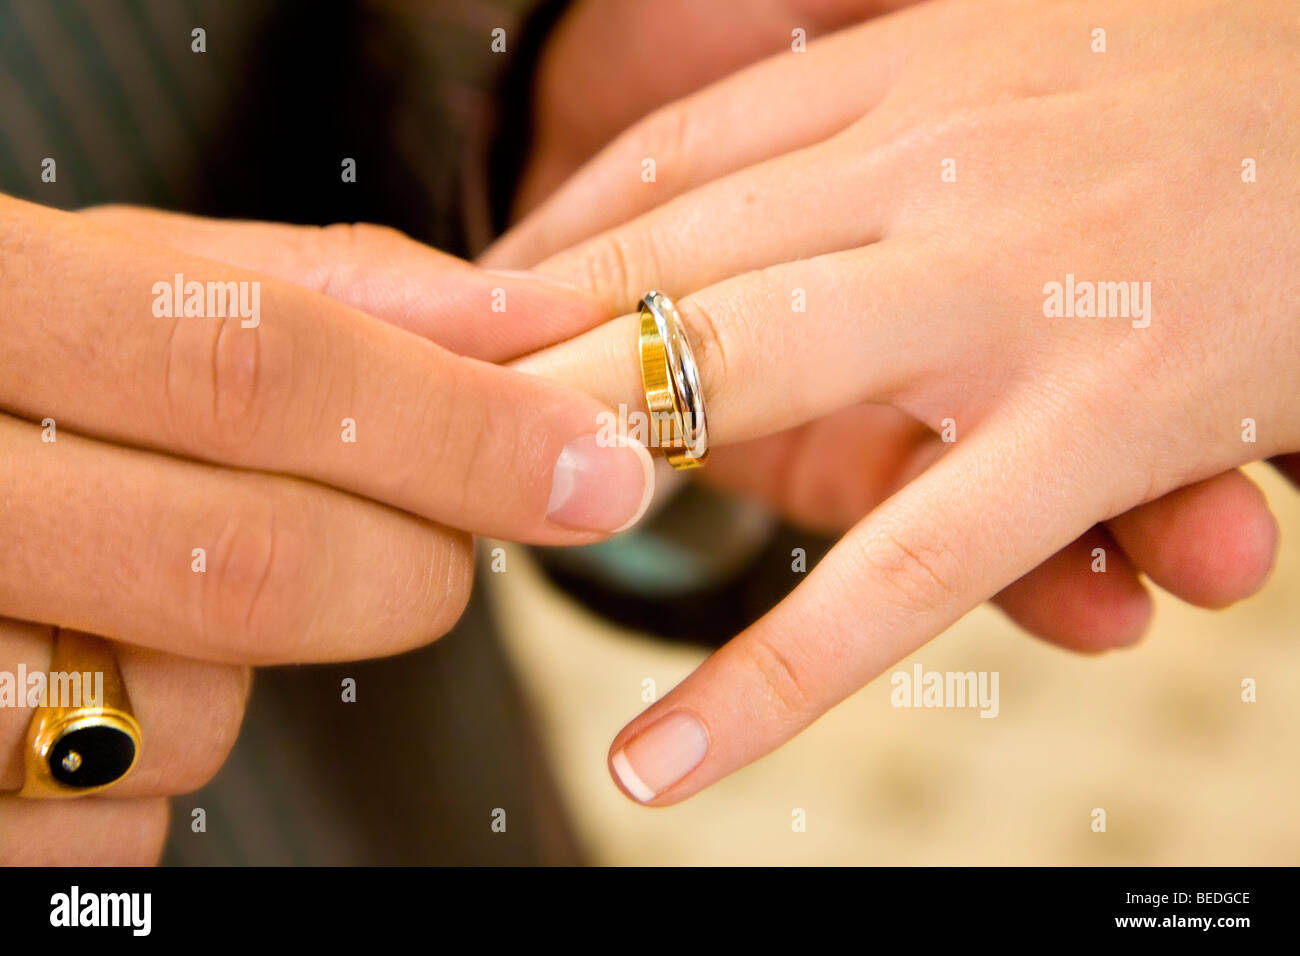 Why do both unmarried men and women wear rings? - Quora